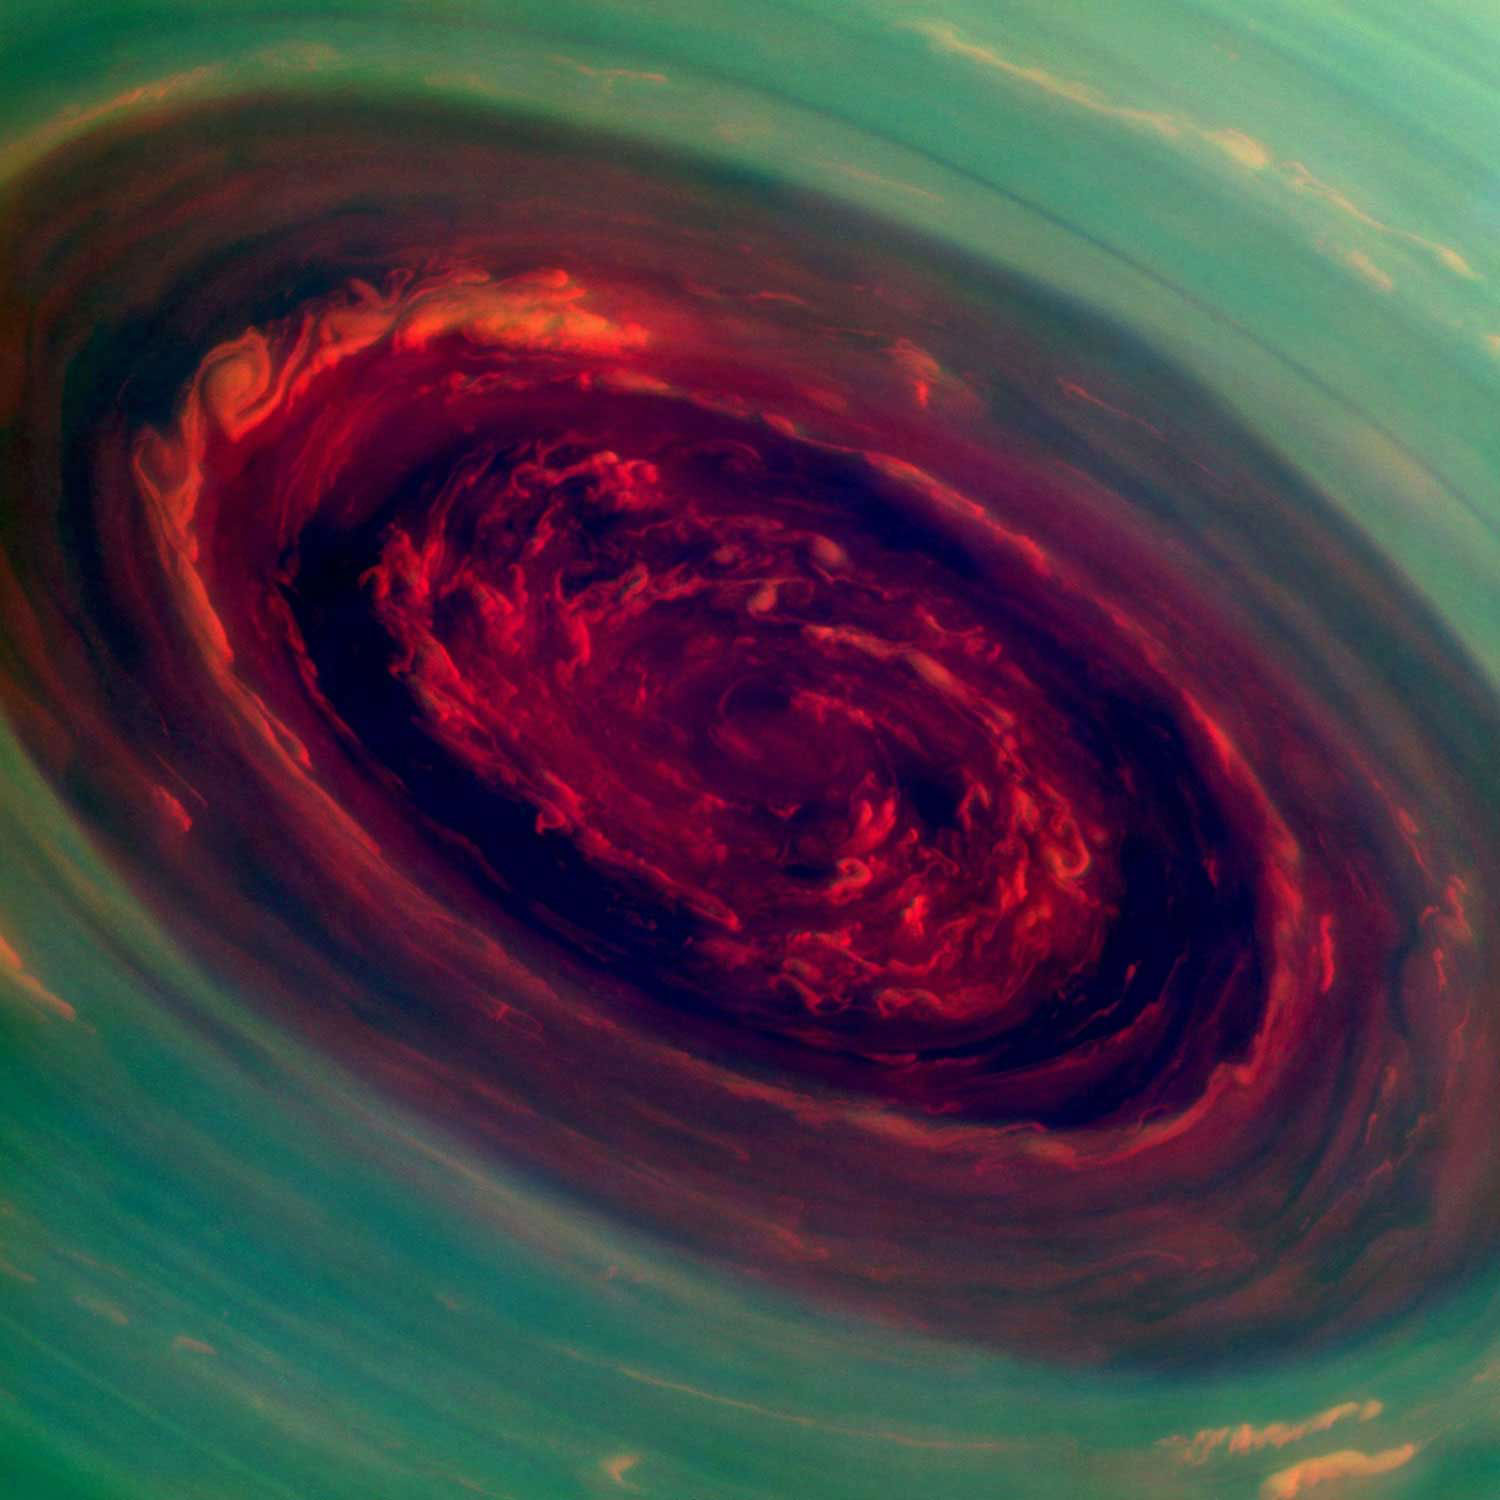 The spinning vortex of Saturn's north polar storm resembles a deep red rose of giant proportions surrounded by green foliage in this false-color image from NASA's Cassini spacecraft. Measurements have sized the eye at a staggering 1,250 miles (2,000 kilometers) across with cloud speeds as fast as 330 miles per hour (150 meters per second).This image is among the first sunlit views of Saturn's north pole captured by Cassini's imaging cameras. When the spacecraft arrived in the Saturnian system in 2004, it was northern winter and the north pole was in darkness. Saturn's north pole was last imaged under sunlight by NASA's Voyager 2 in 1981; however, the observation geometry did not allow for detailed views of the poles. Consequently, it is not known how long this newly discovered north-polar hurricane has been active.The images were taken with the Cassini spacecraft narrow-angle camera on Nov. 27, 2012, using a combination of spectral filters sensitive to wavelengths of near-infrared light. The images filtered at 890 nanometers are projected as blue. The images filtered at 728 nanometers are projected as green, and images filtered at 752 nanometers are projected as red. In this scheme, red indicates low clouds and green indicates high ones.The view was acquired at a distance of approximately 261,000 miles (419,000 kilometers) from Saturn and at a sun-Saturn-spacecraft, or phase, angle of 94 degrees. Image scale is 1 mile (2 kilometers) per pixel. The Cassini-Huygens mission is a cooperative project of NASA, the European Space Agency and the Italian Space Agency. NASA's Jet Propulsion Laboratory, a division of the California Institute of Technology in Pasadena, manages the mission for NASA's Science Mission Directorate, Washington, D.C. The Cassini orbiter and its two onboard cameras were designed, developed and assembled at JPL. The imaging operations center is based at the Space Science Institute in Boulder, Colo.For more information about the Cassini-Huygens